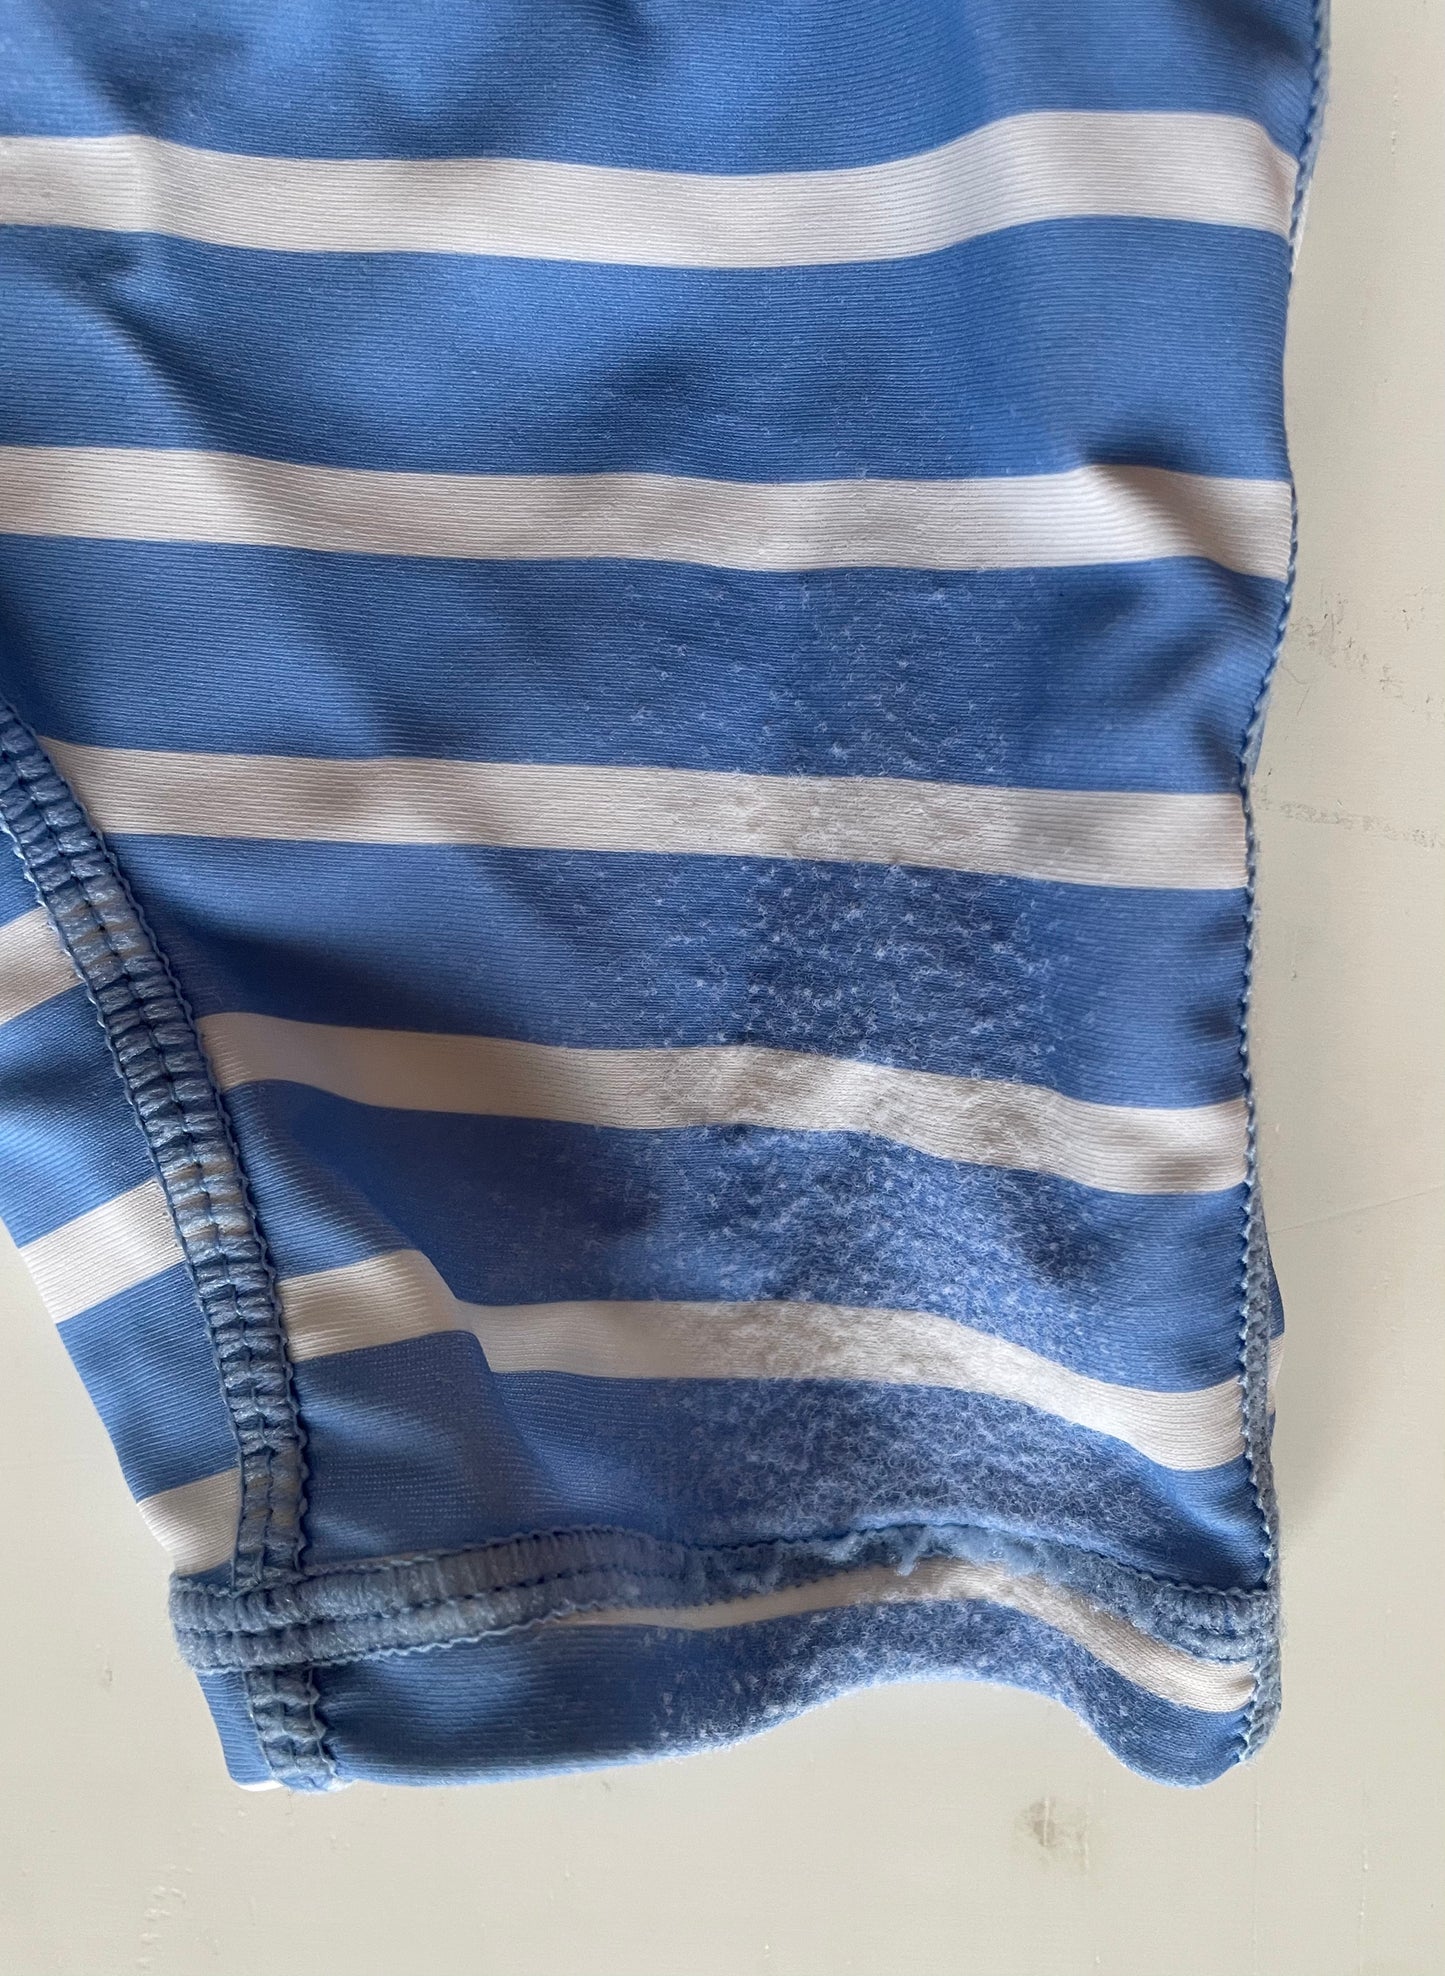 Rugged Butts Boys 3-6M Blue/White Stripe bathing suit